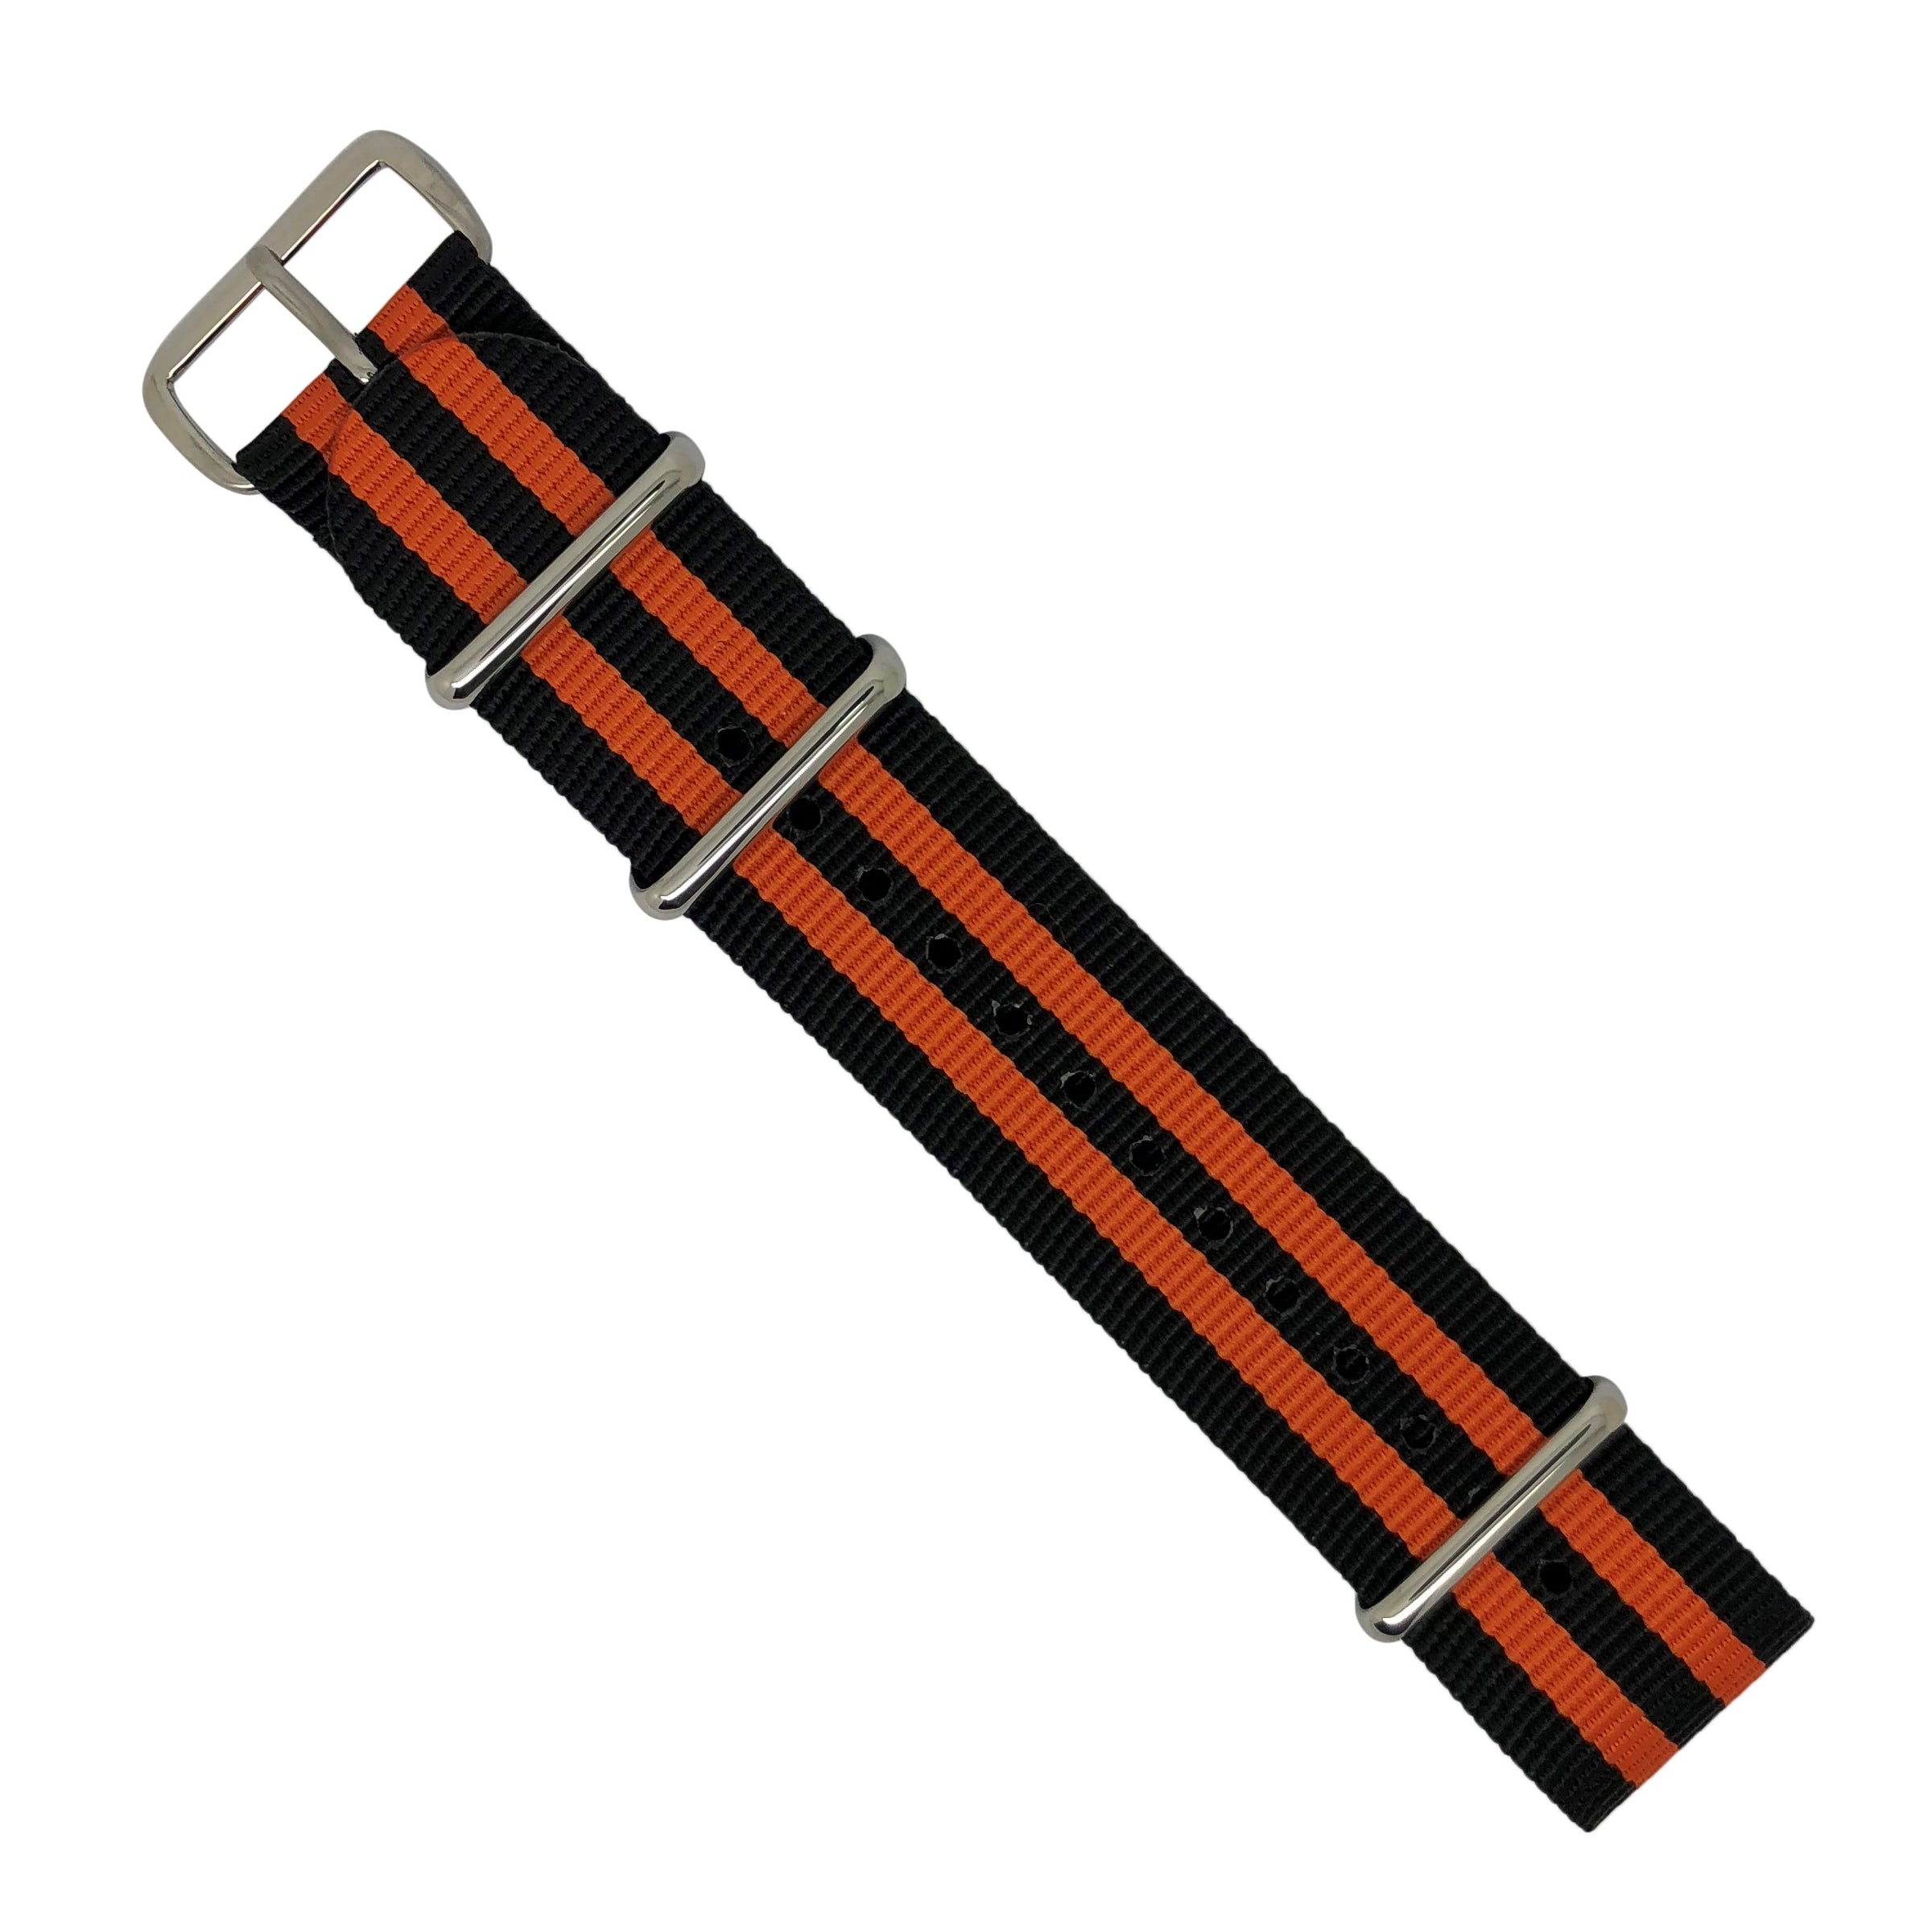 Premium Nato Strap in Black Orange Small Stripes with Polished Silver Buckle (22mm) - Nomad watch Works